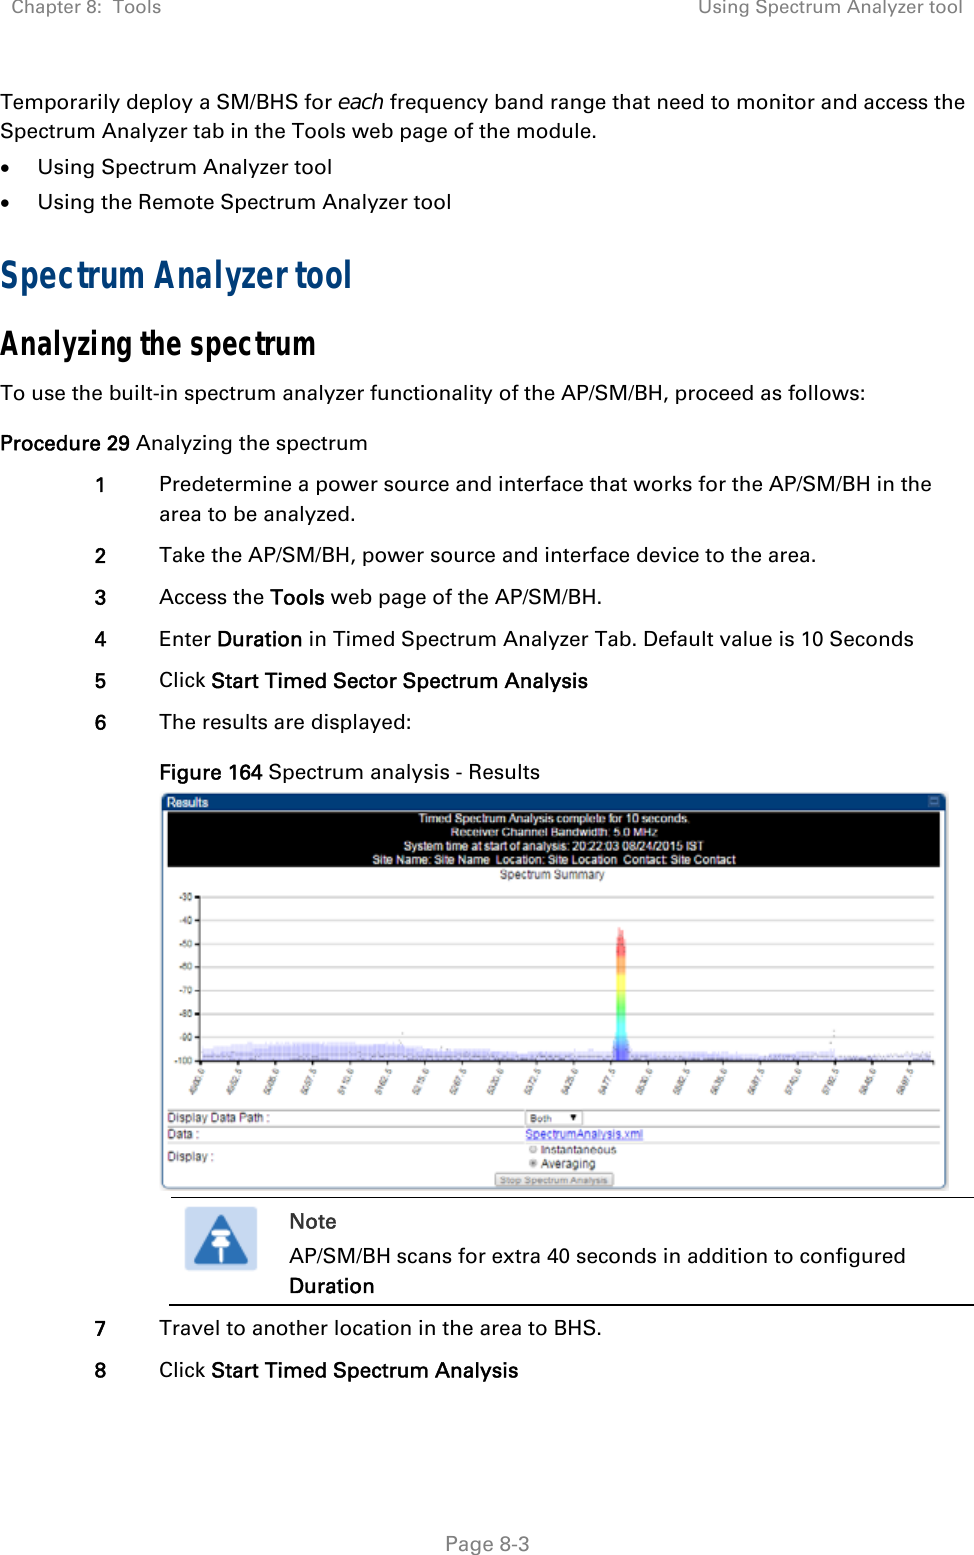 Chapter 8:  Tools  Using Spectrum Analyzer tool   Page 8-3 Temporarily deploy a SM/BHS for each frequency band range that need to monitor and access the Spectrum Analyzer tab in the Tools web page of the module.   Using Spectrum Analyzer tool  Using the Remote Spectrum Analyzer tool Spectrum Analyzer tool Analyzing the spectrum To use the built-in spectrum analyzer functionality of the AP/SM/BH, proceed as follows: Procedure 29 Analyzing the spectrum 1  Predetermine a power source and interface that works for the AP/SM/BH in the area to be analyzed. 2  Take the AP/SM/BH, power source and interface device to the area. 3  Access the Tools web page of the AP/SM/BH. 4  Enter Duration in Timed Spectrum Analyzer Tab. Default value is 10 Seconds 5  Click Start Timed Sector Spectrum Analysis 6  The results are displayed: Figure 164 Spectrum analysis - Results   Note AP/SM/BH scans for extra 40 seconds in addition to configured Duration  7  Travel to another location in the area to BHS. 8  Click Start Timed Spectrum Analysis 